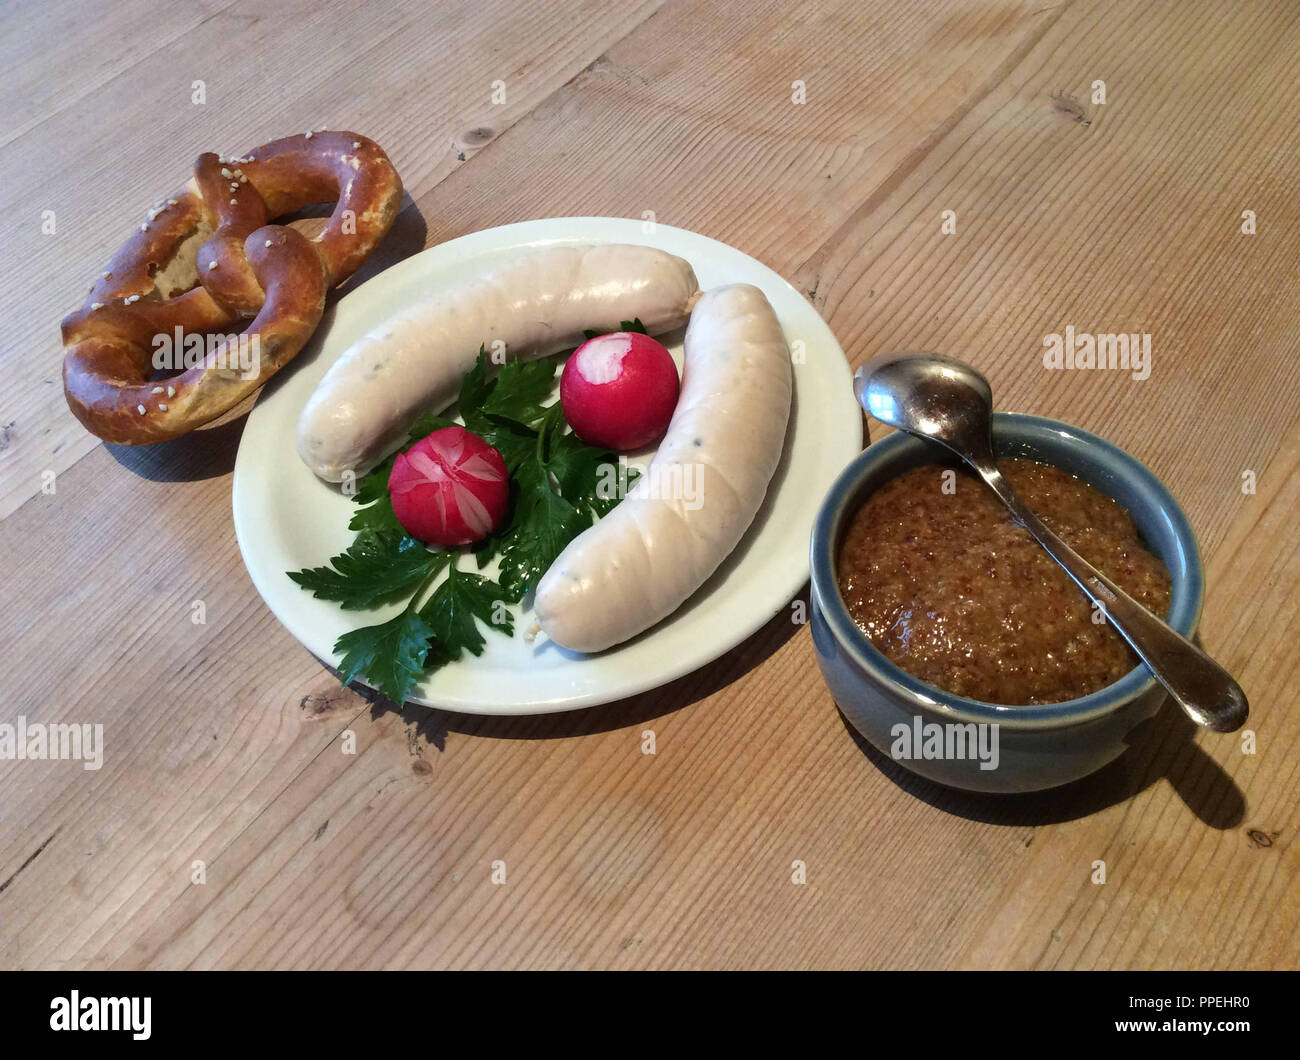 Weisswurst snack or breakfast with pretzel, rolls, parsley and mustard on a rustic wooden table. Stock Photo